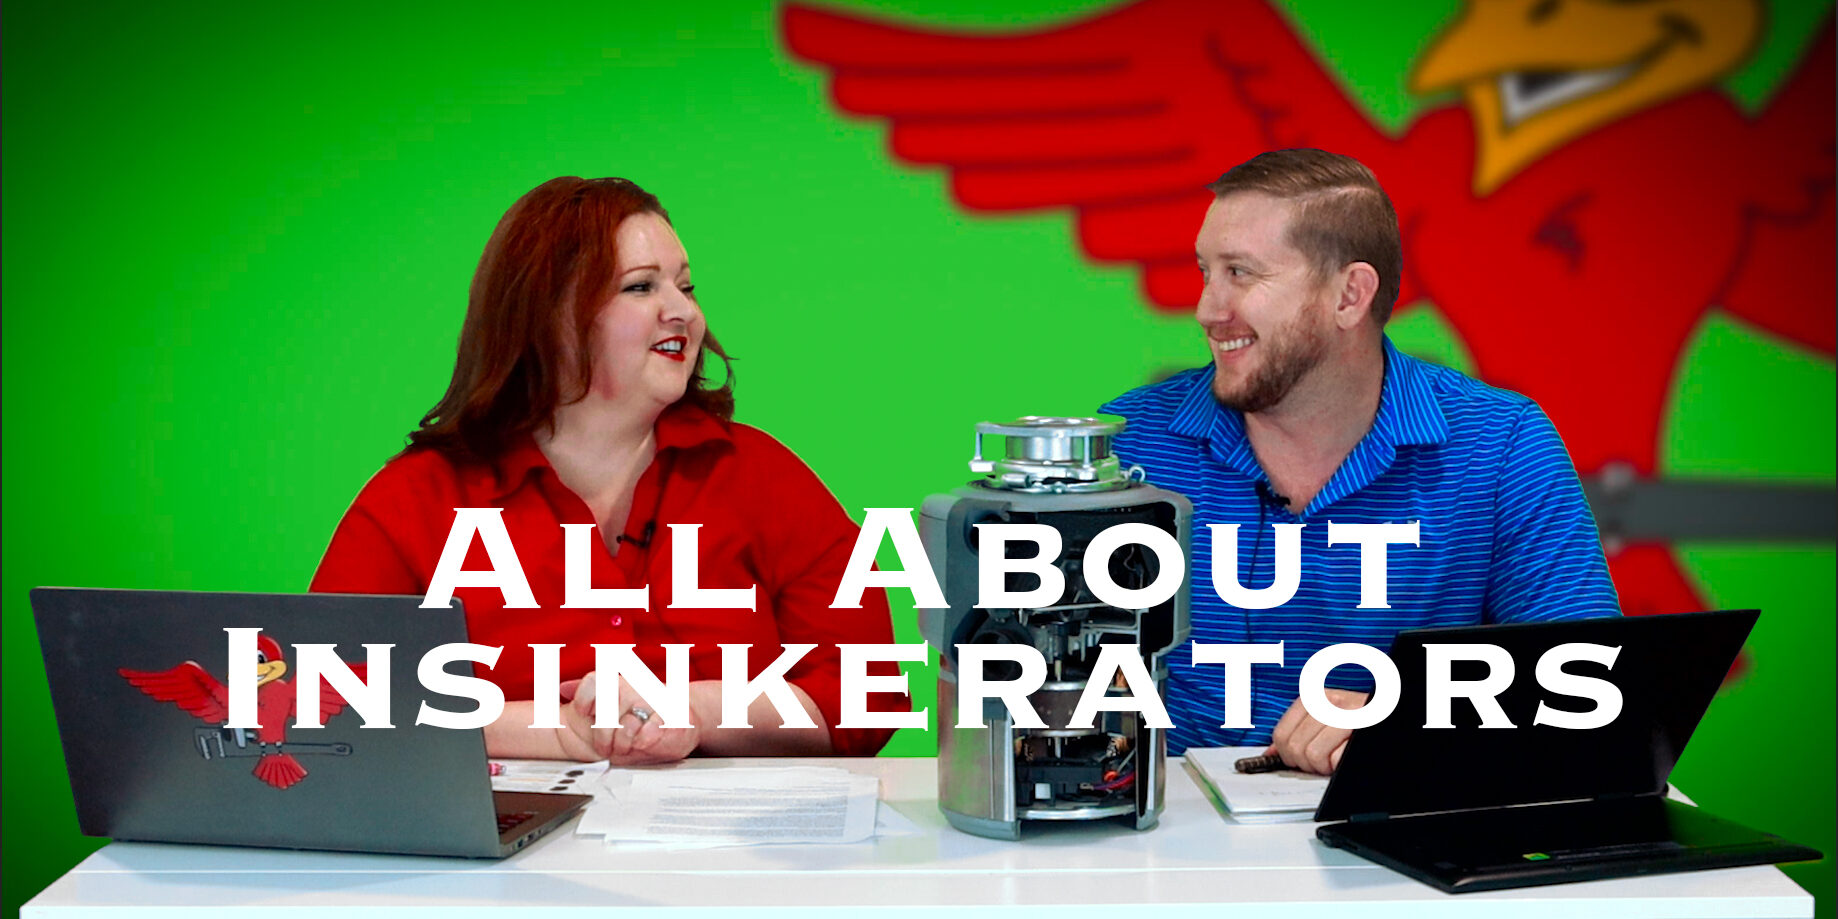 Cover photo for blog and video "All About Insinkerators"